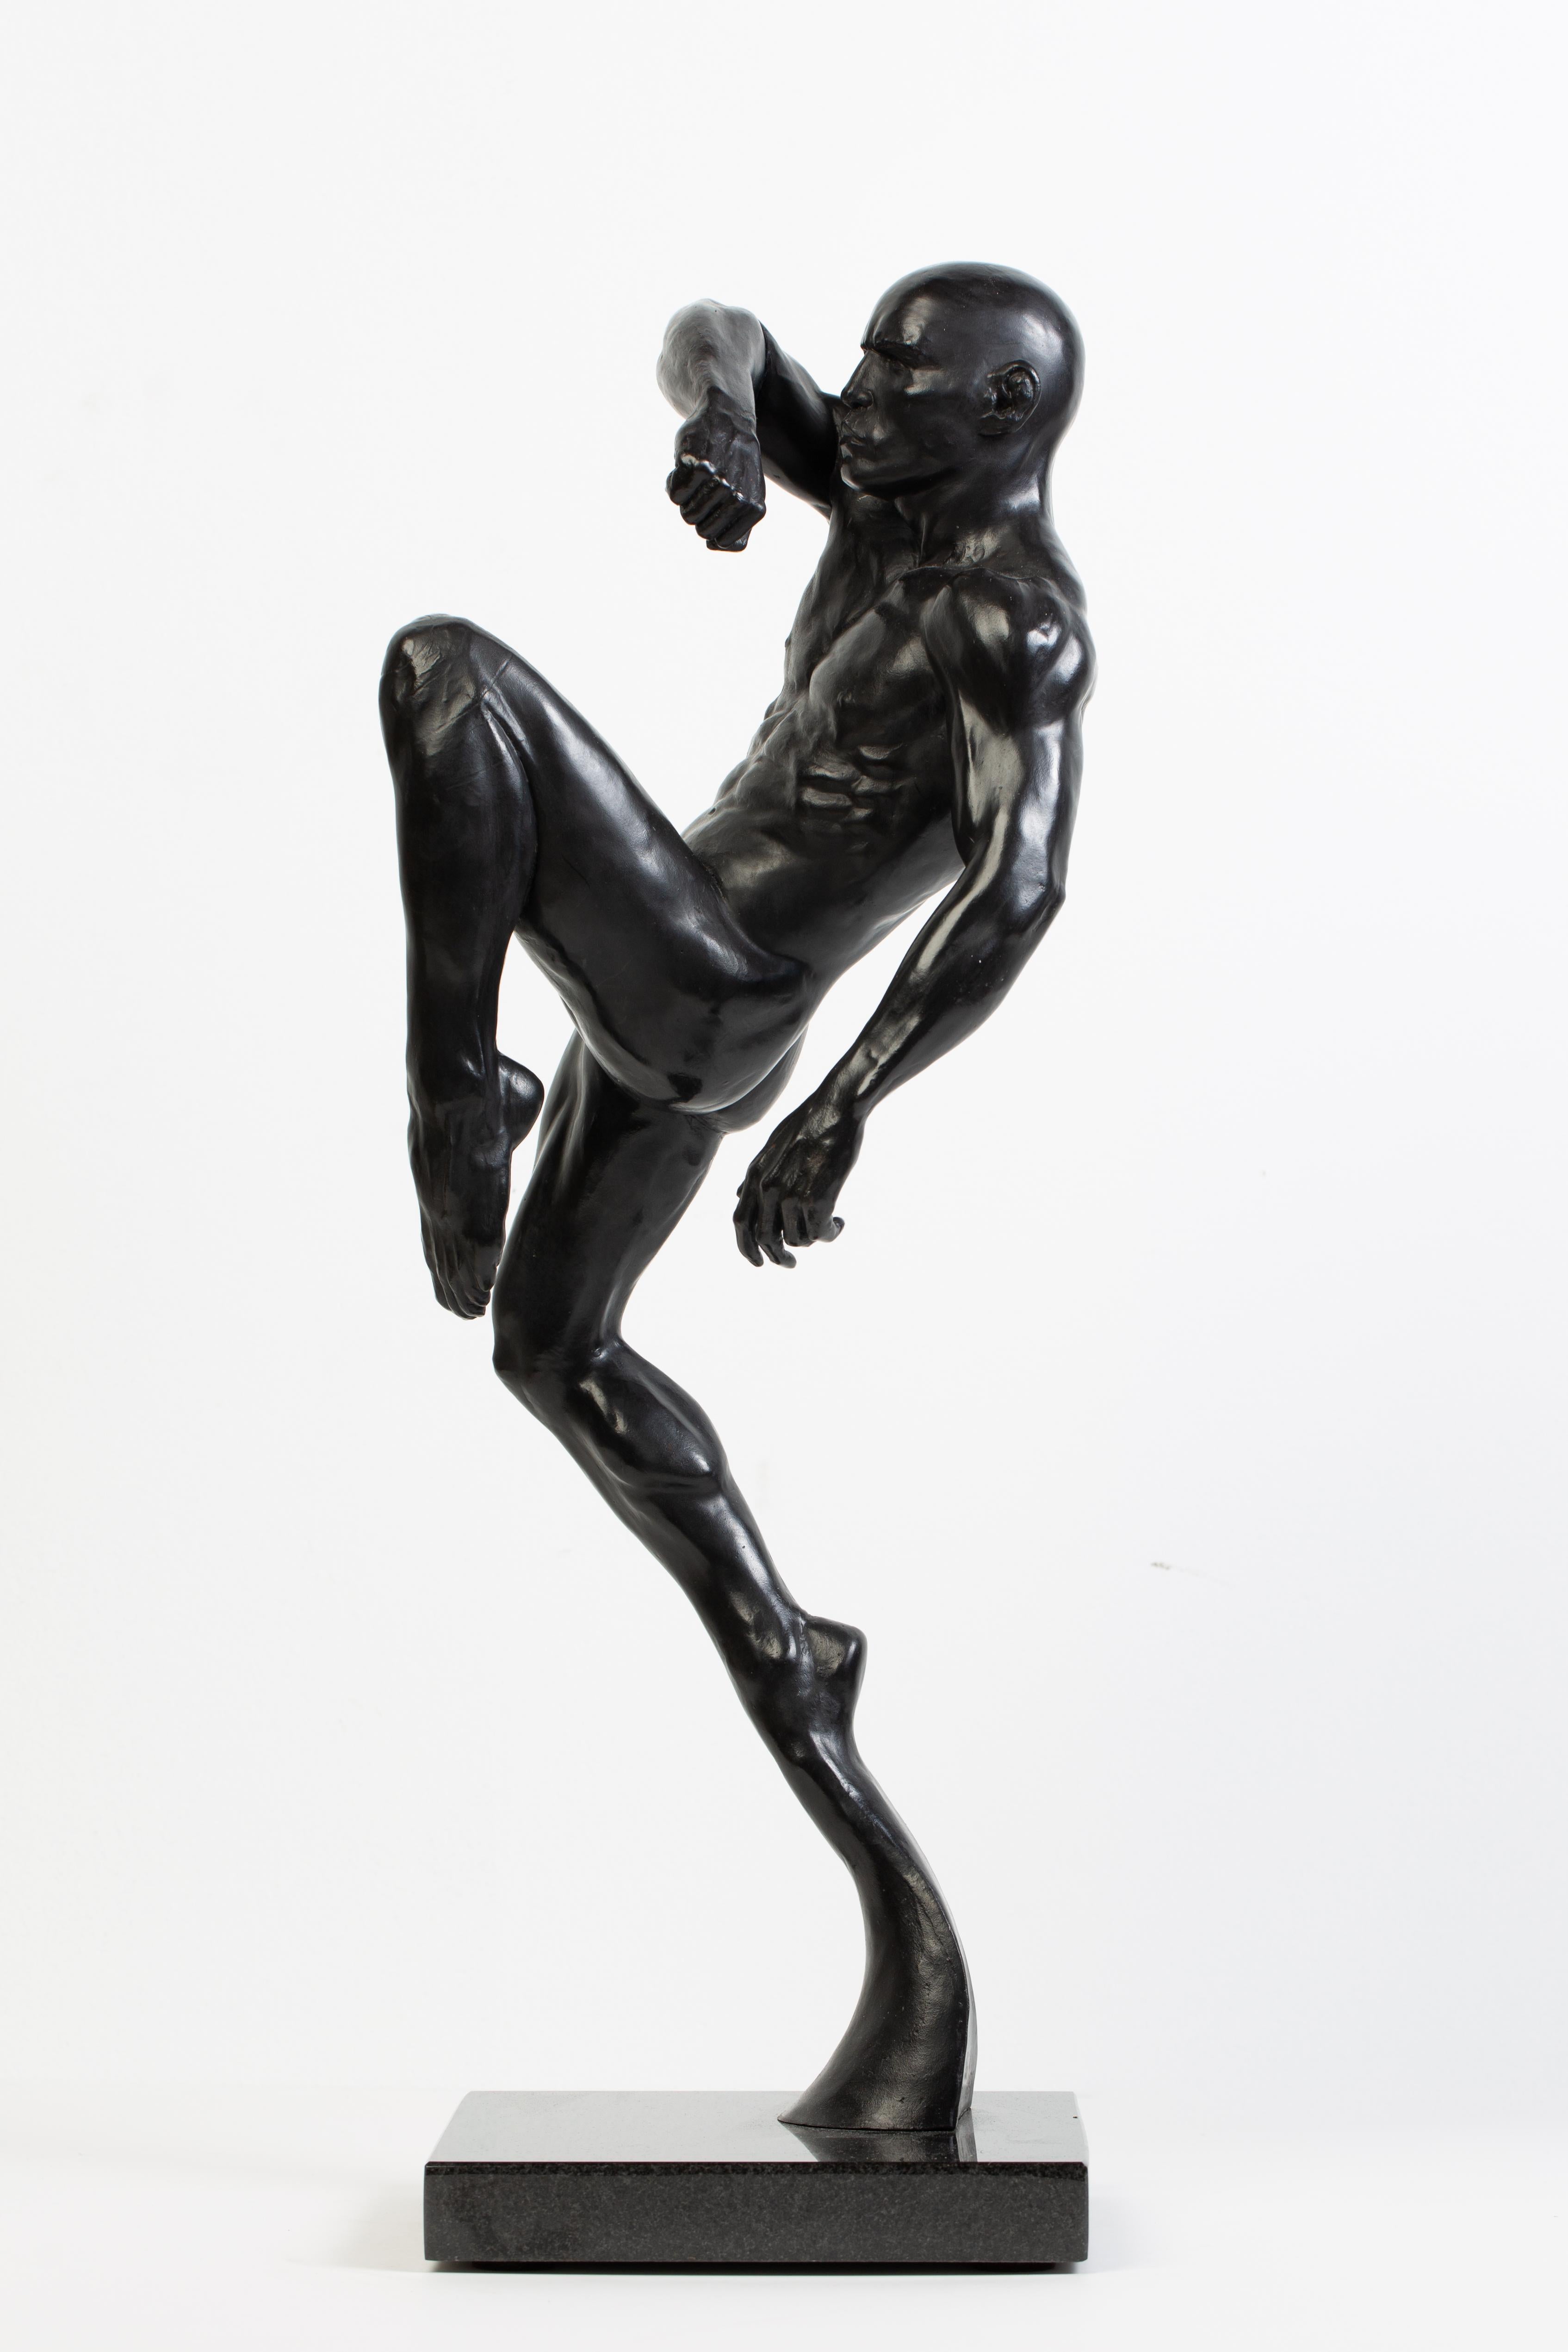 Dean Kugler Nude Sculpture - This Impact - Contemporary Bronze Nude Male Sculpture in Action Pose